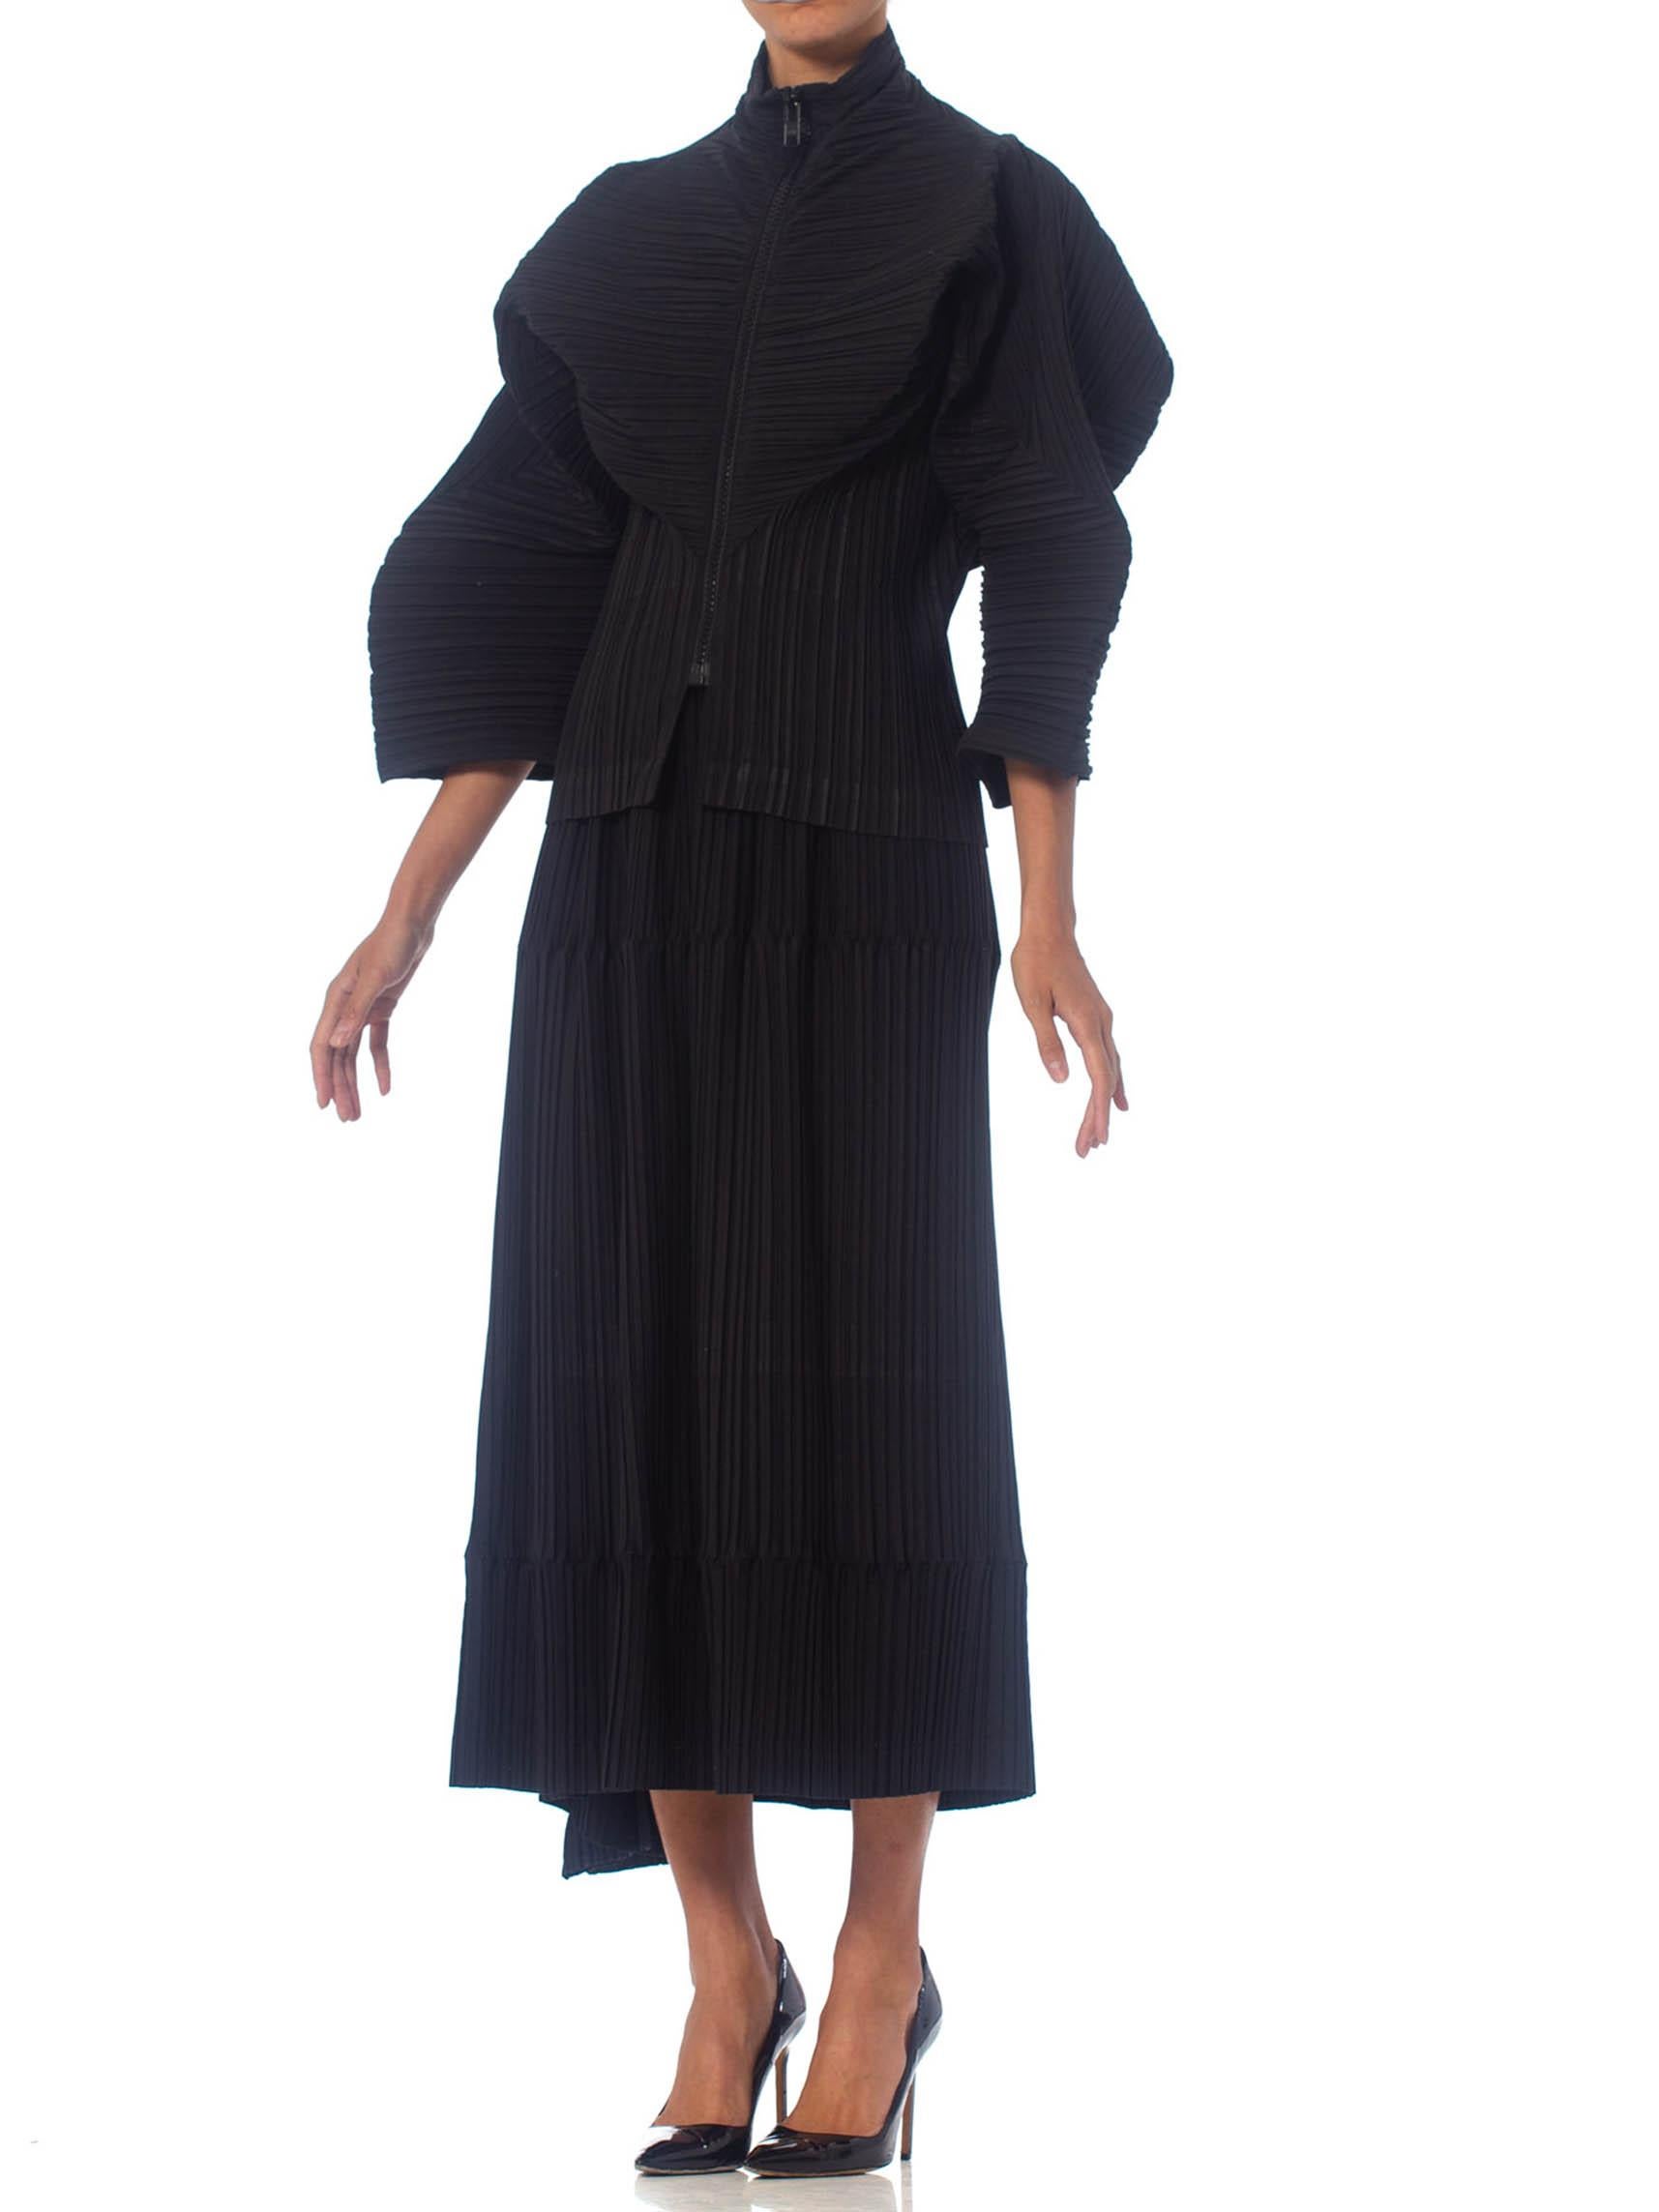 1990S ISSEY MIYAKE Black Pleated Poly Blend Jacket & Skirt Ensemble For Sale 3